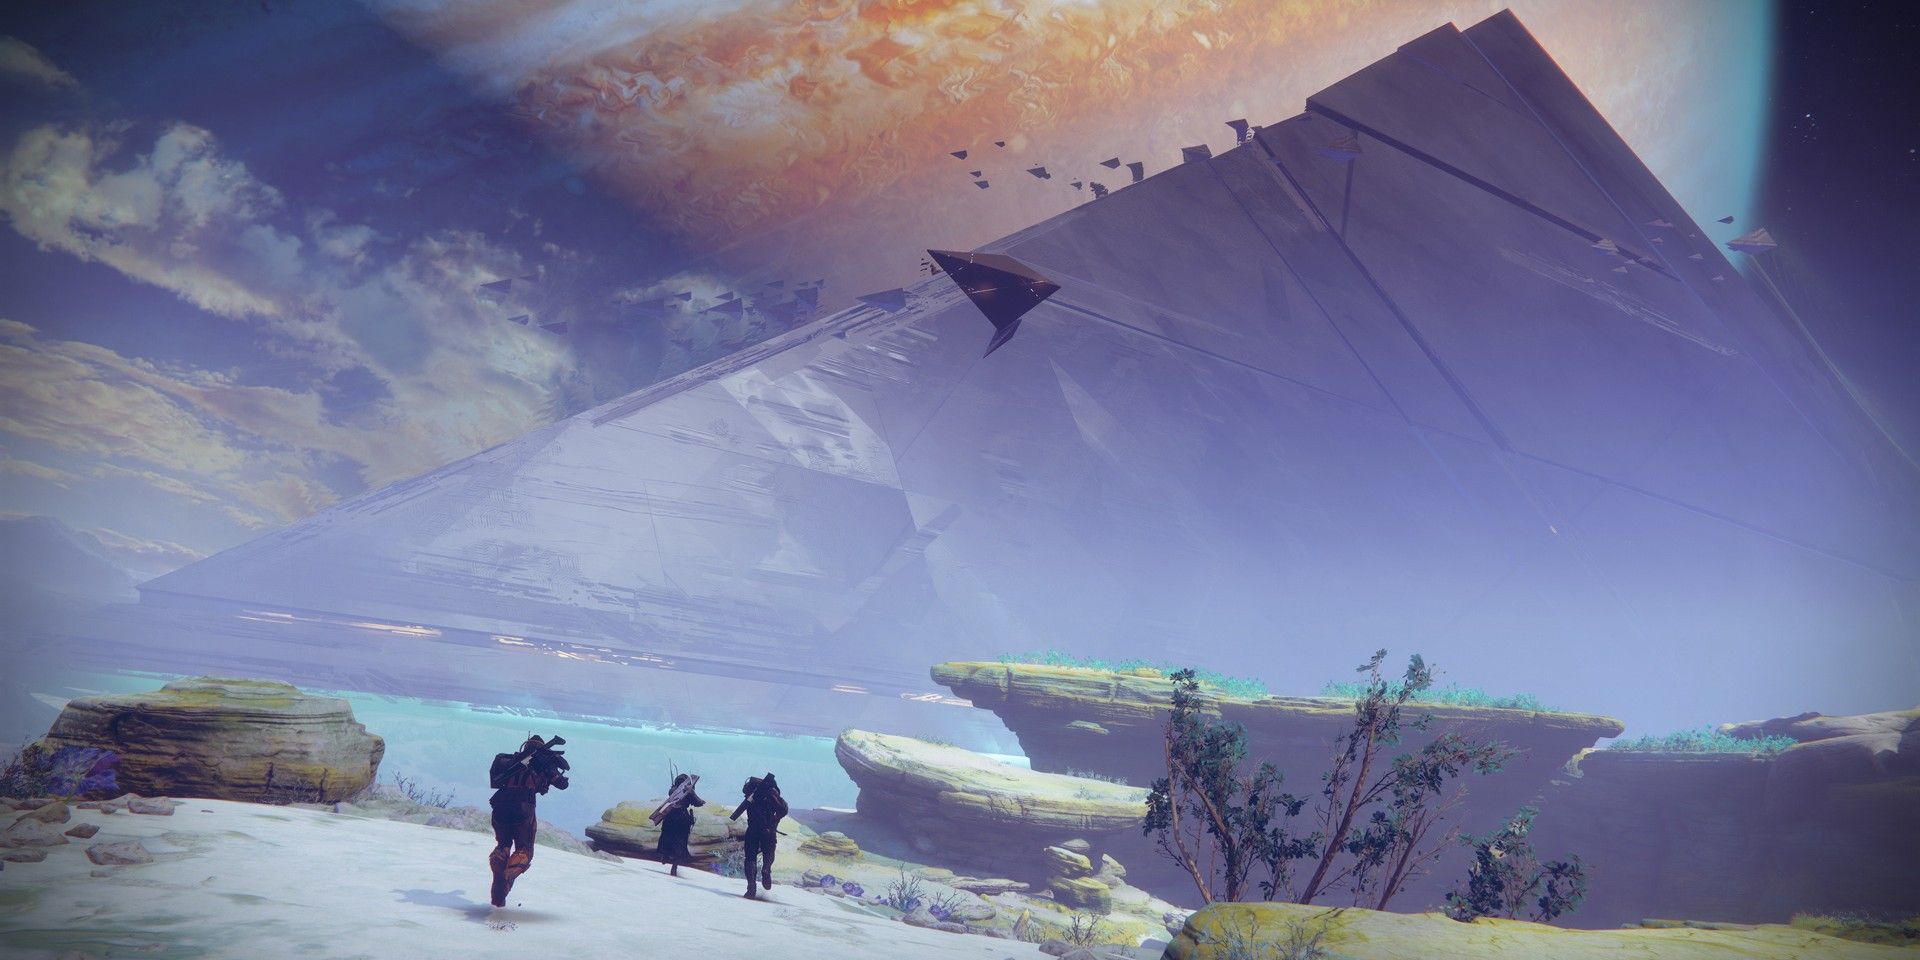 The lingering threat of the Black Fleet will likely see interesting developments in Destiny 2 Year 5.